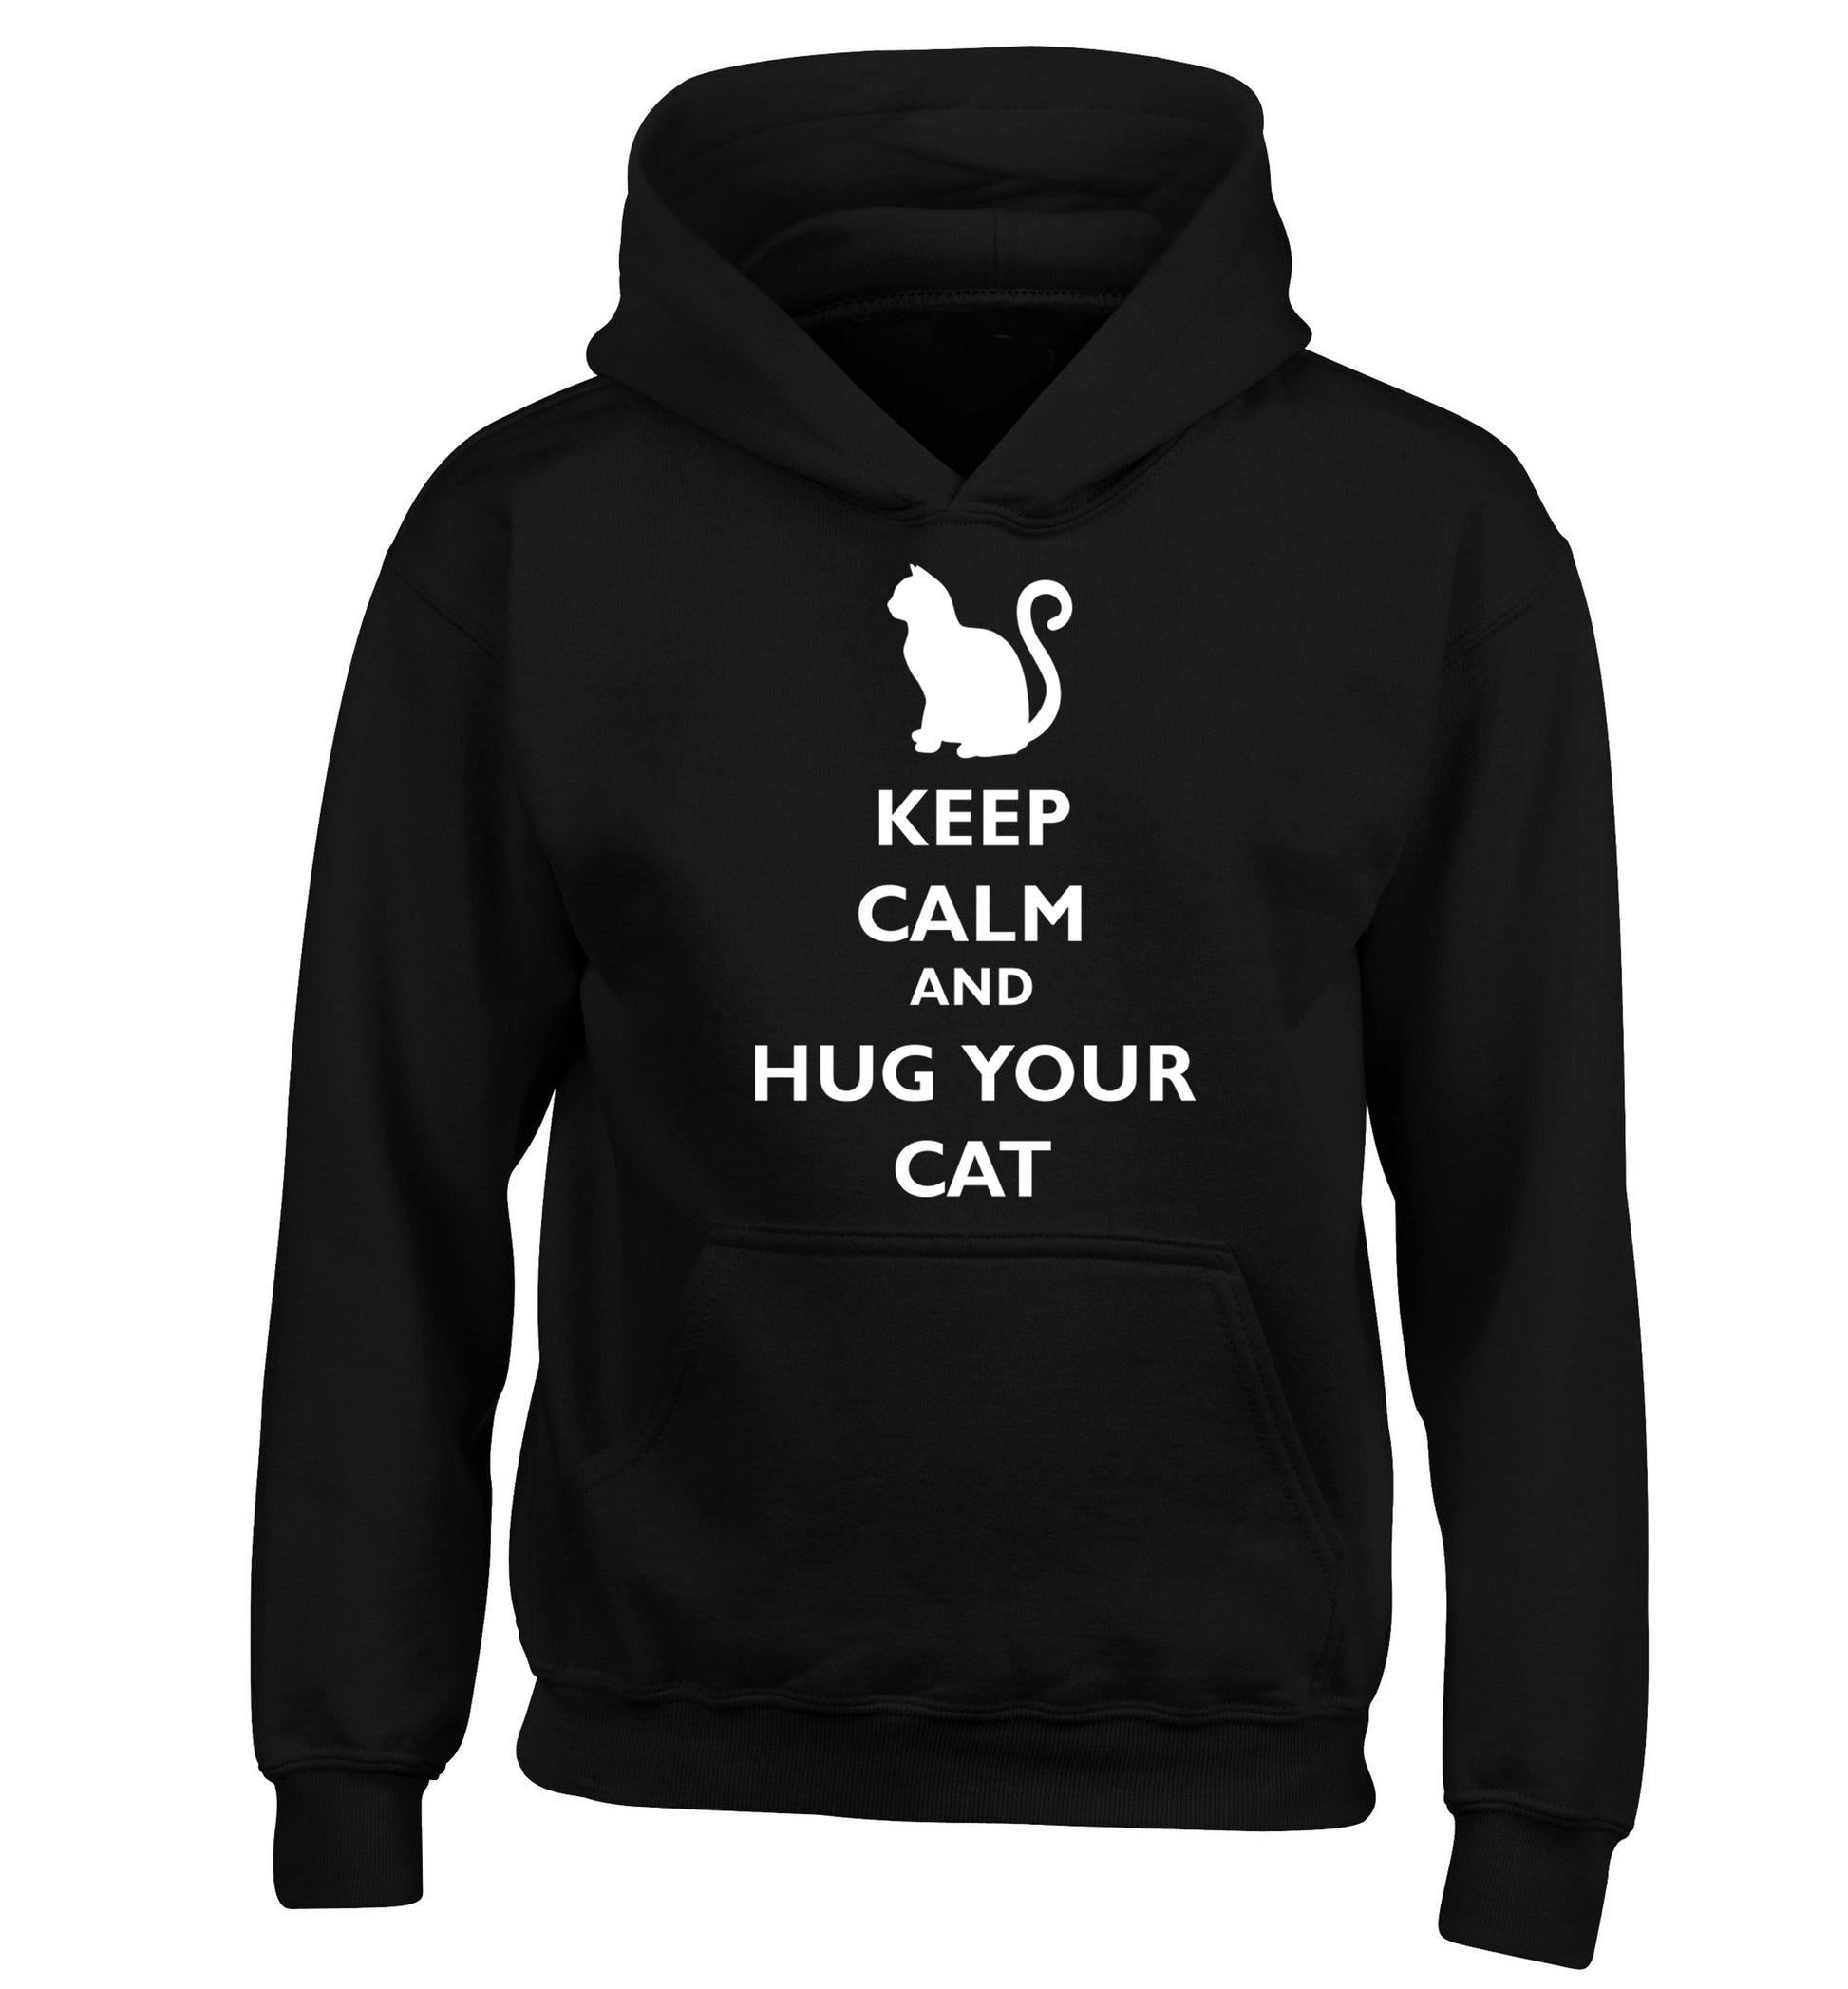 Keep calm and hug your cat children's black hoodie 12-13 Years